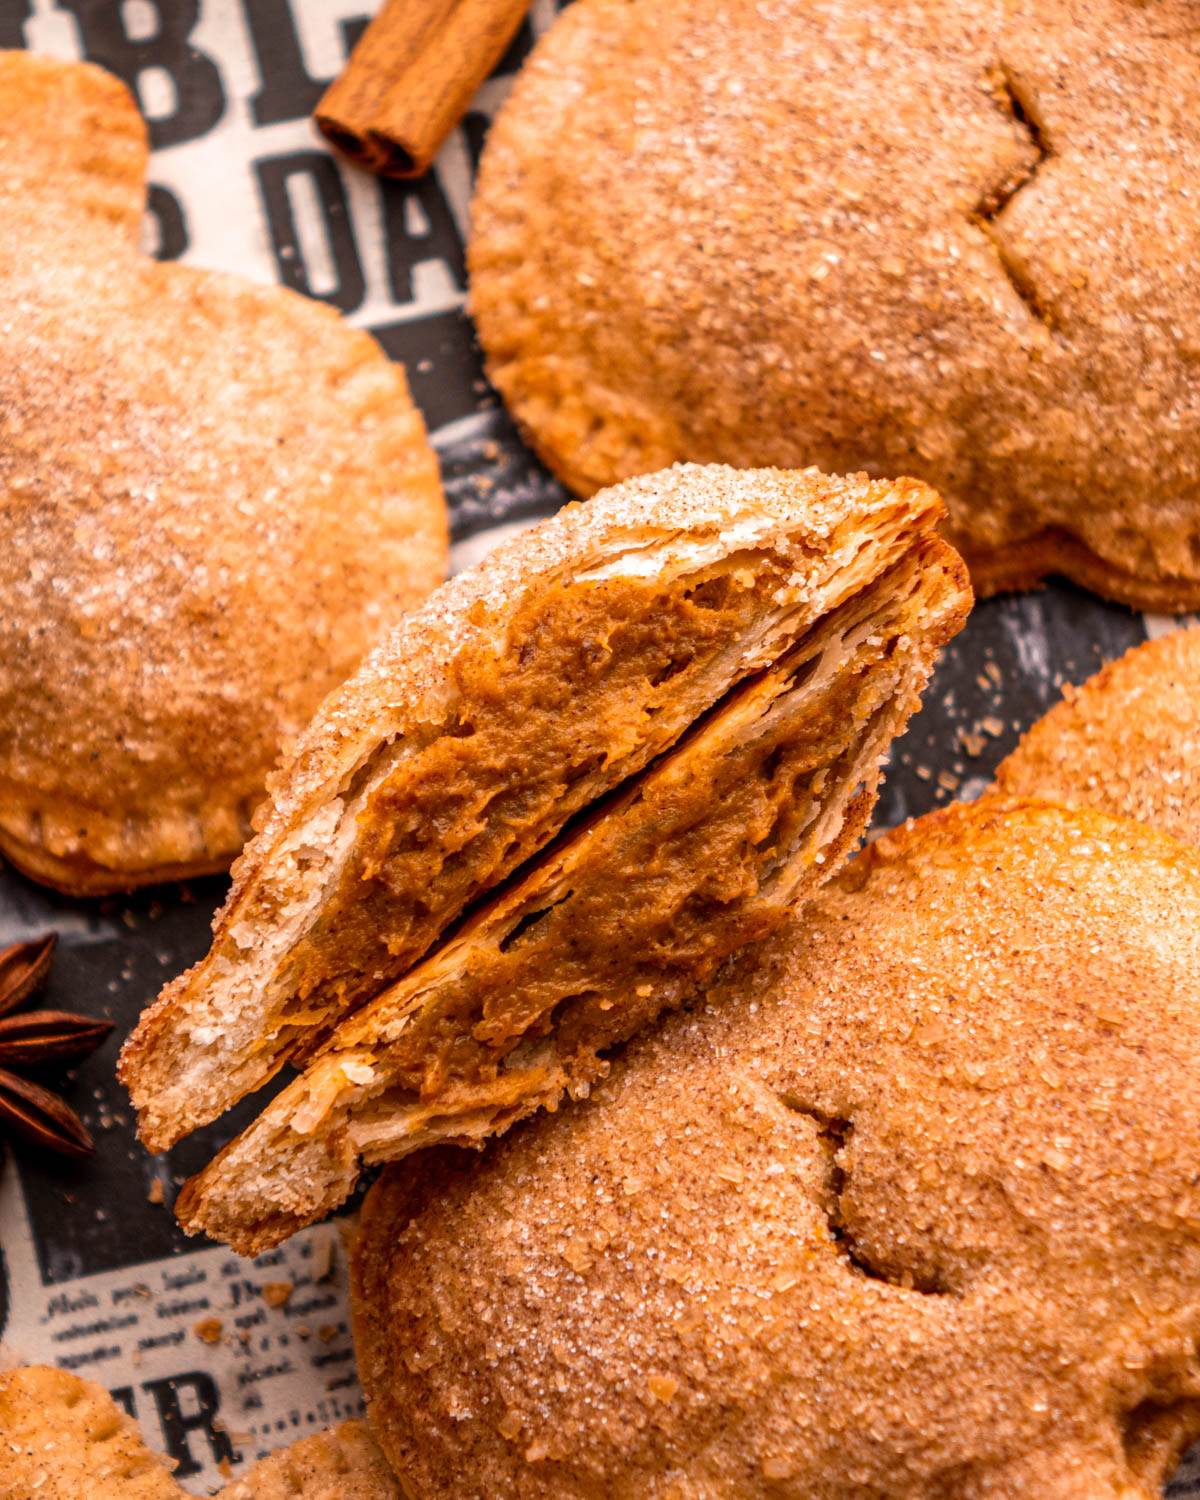 close up of pumpkin pasty cut in half so filling is visible, surrounded by other pumpkin pasties on newspaper 